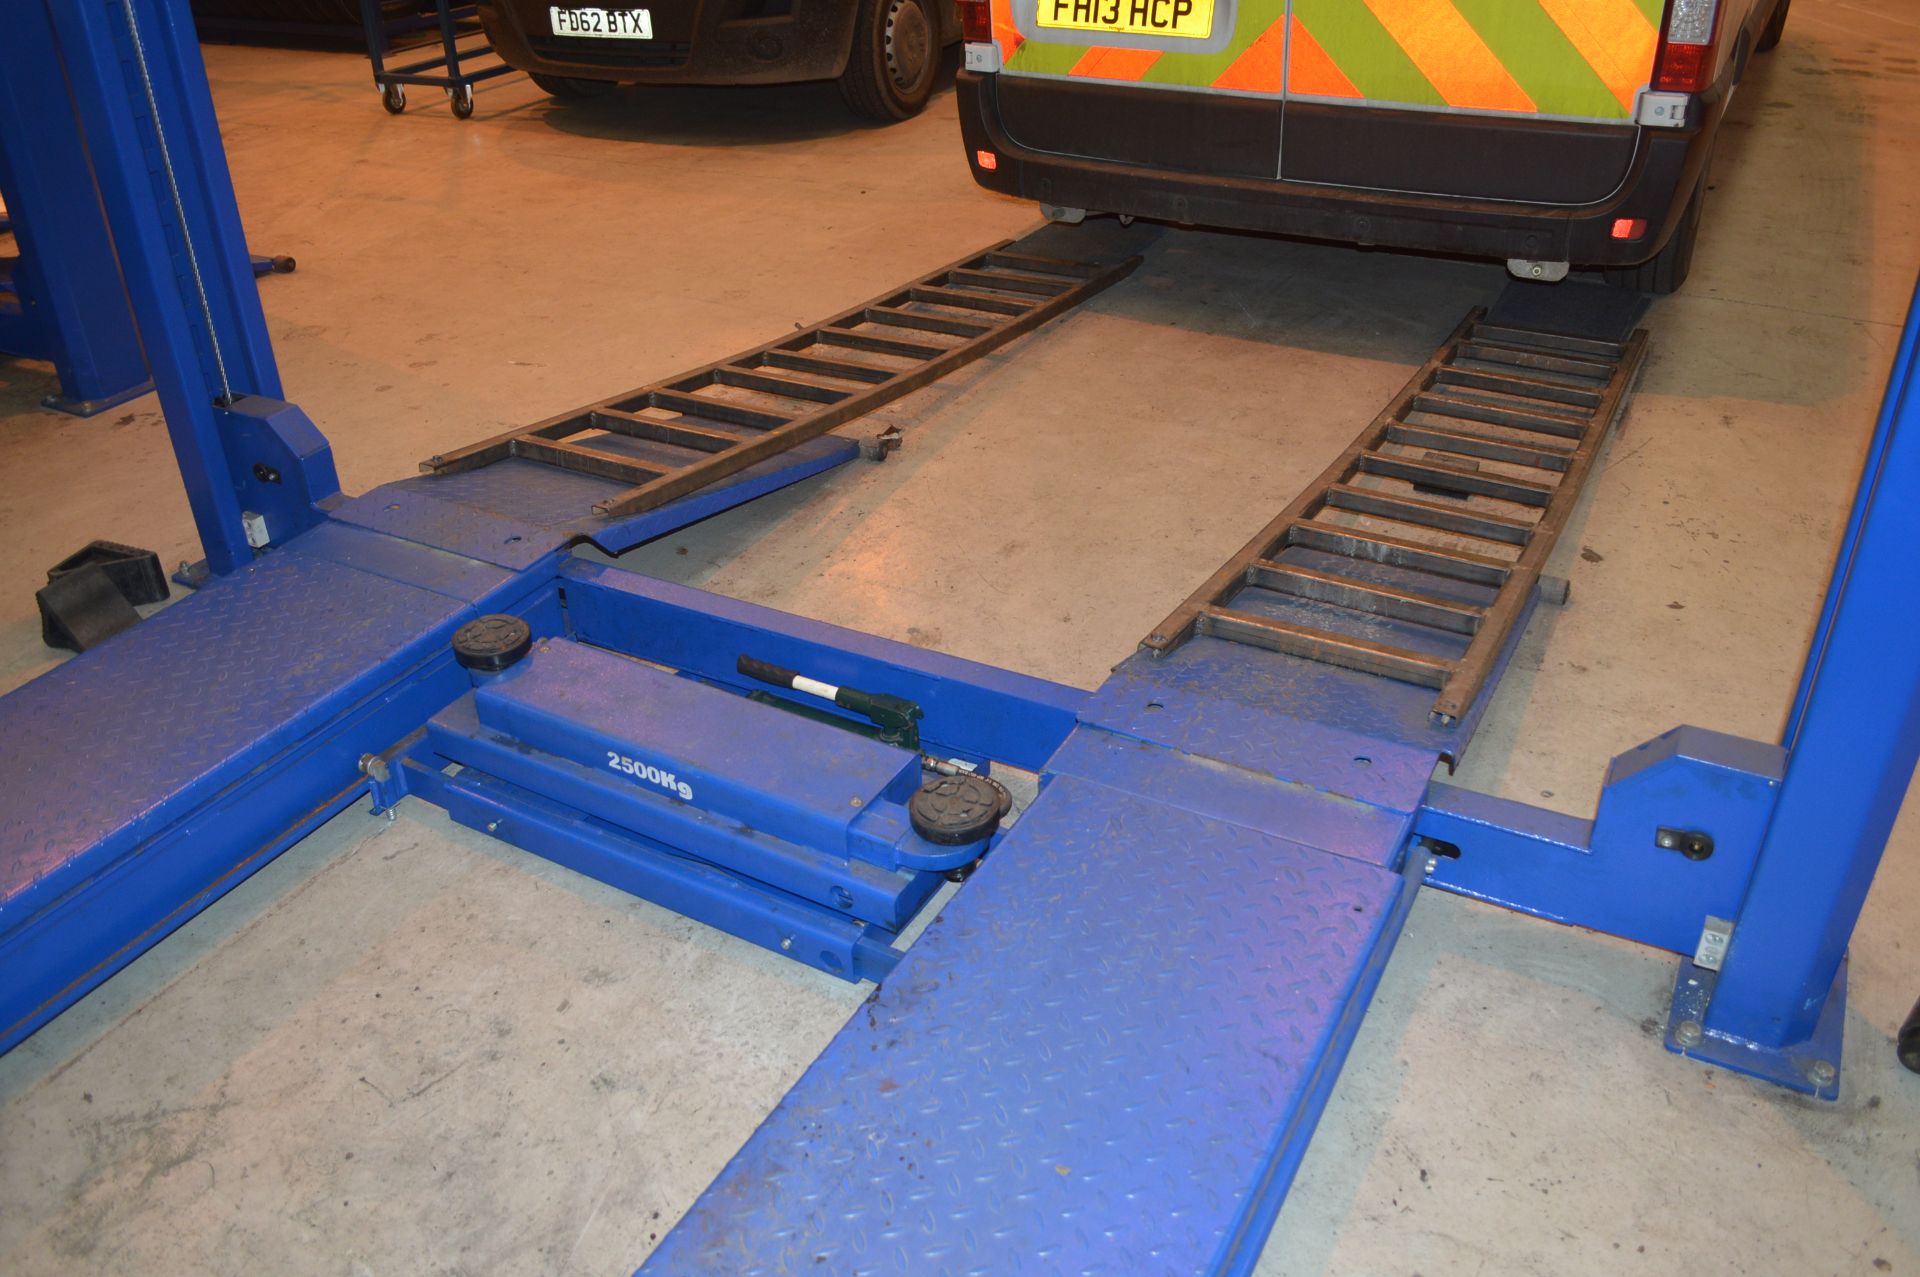 Automotech AS 6640 Four Poster Alignment Lift 4000kg Capacity with 2500kg Rolling Jack Beam & - Image 9 of 10